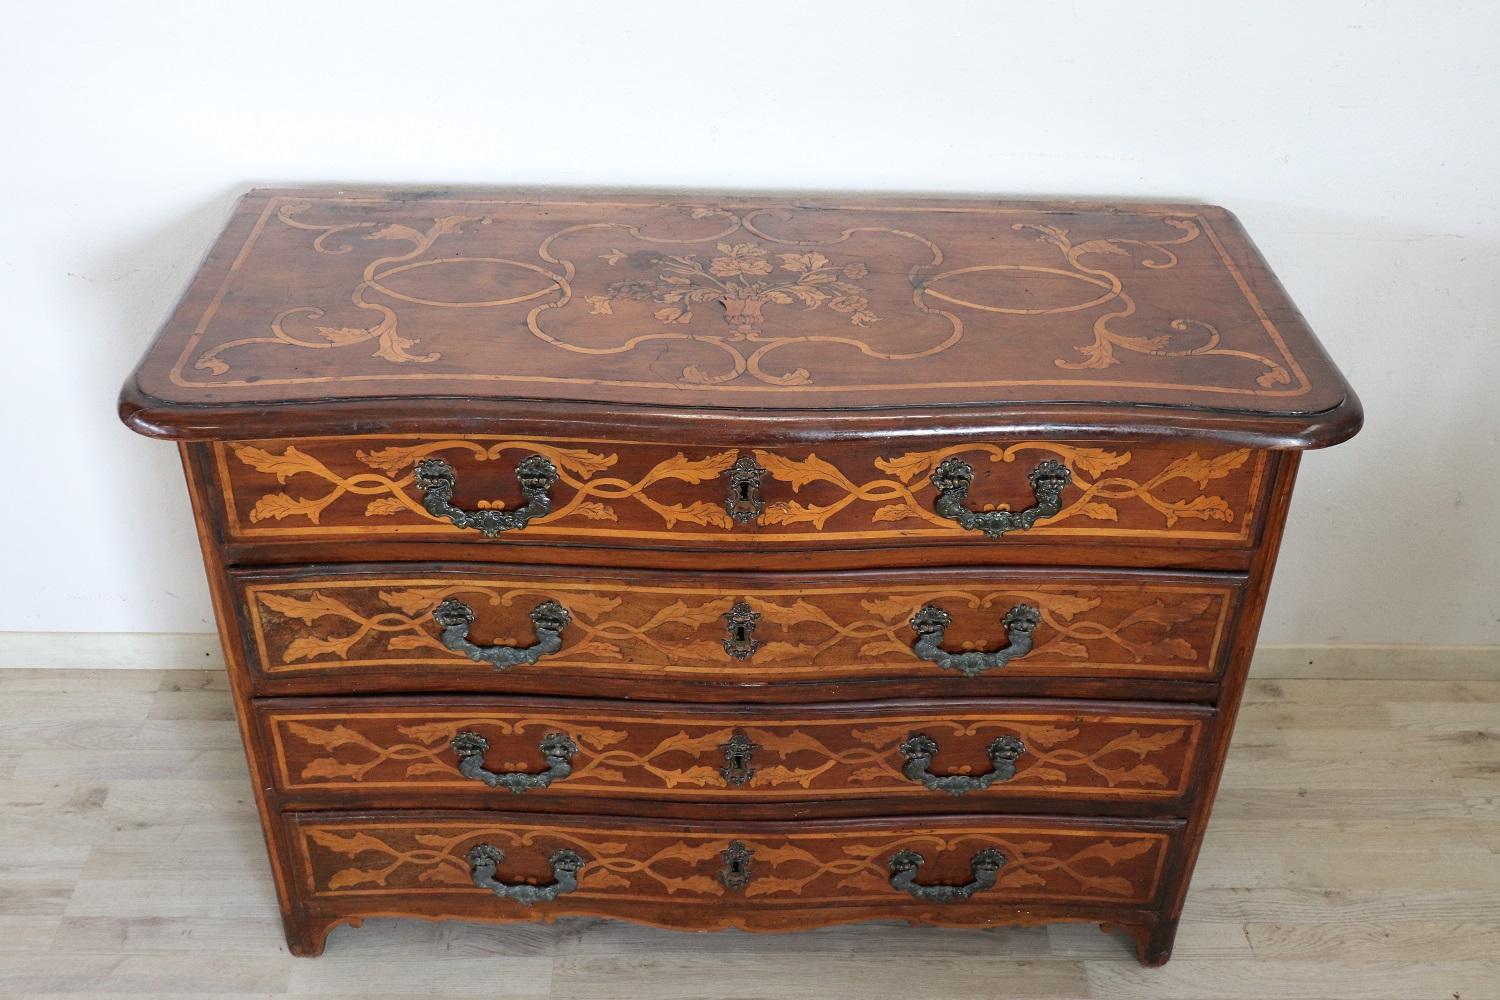 Important antique Italian Louis XIV period chest of drawers 1680s. On the front four large and useful drawers with a particular wavy shape. This chest of drawers is characterized by a spectacular and rich inlay work in walnut wood, made with